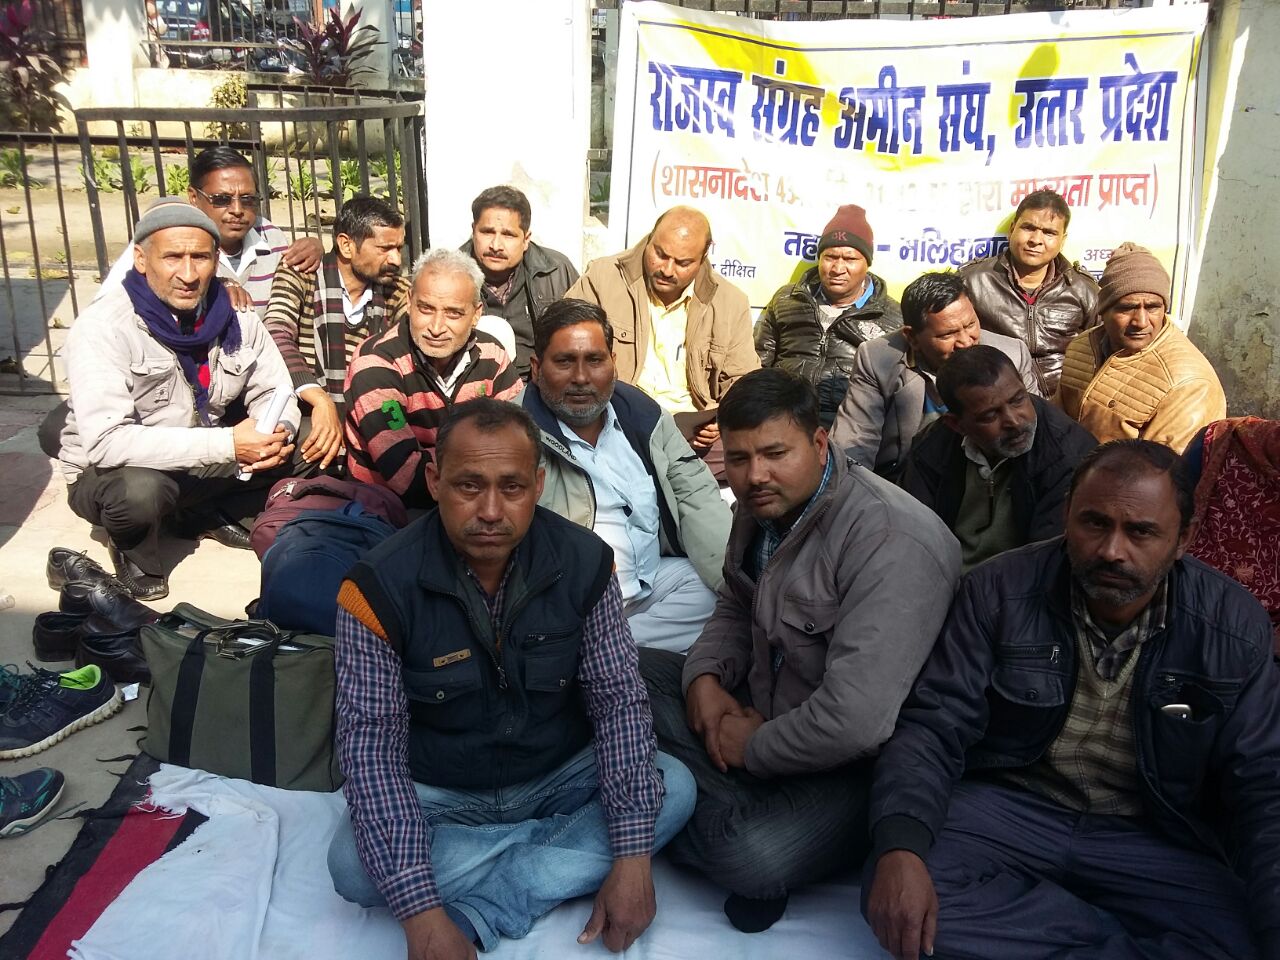 Recovery of Rs. 600 crores was effected by third day protest of sangrah amin